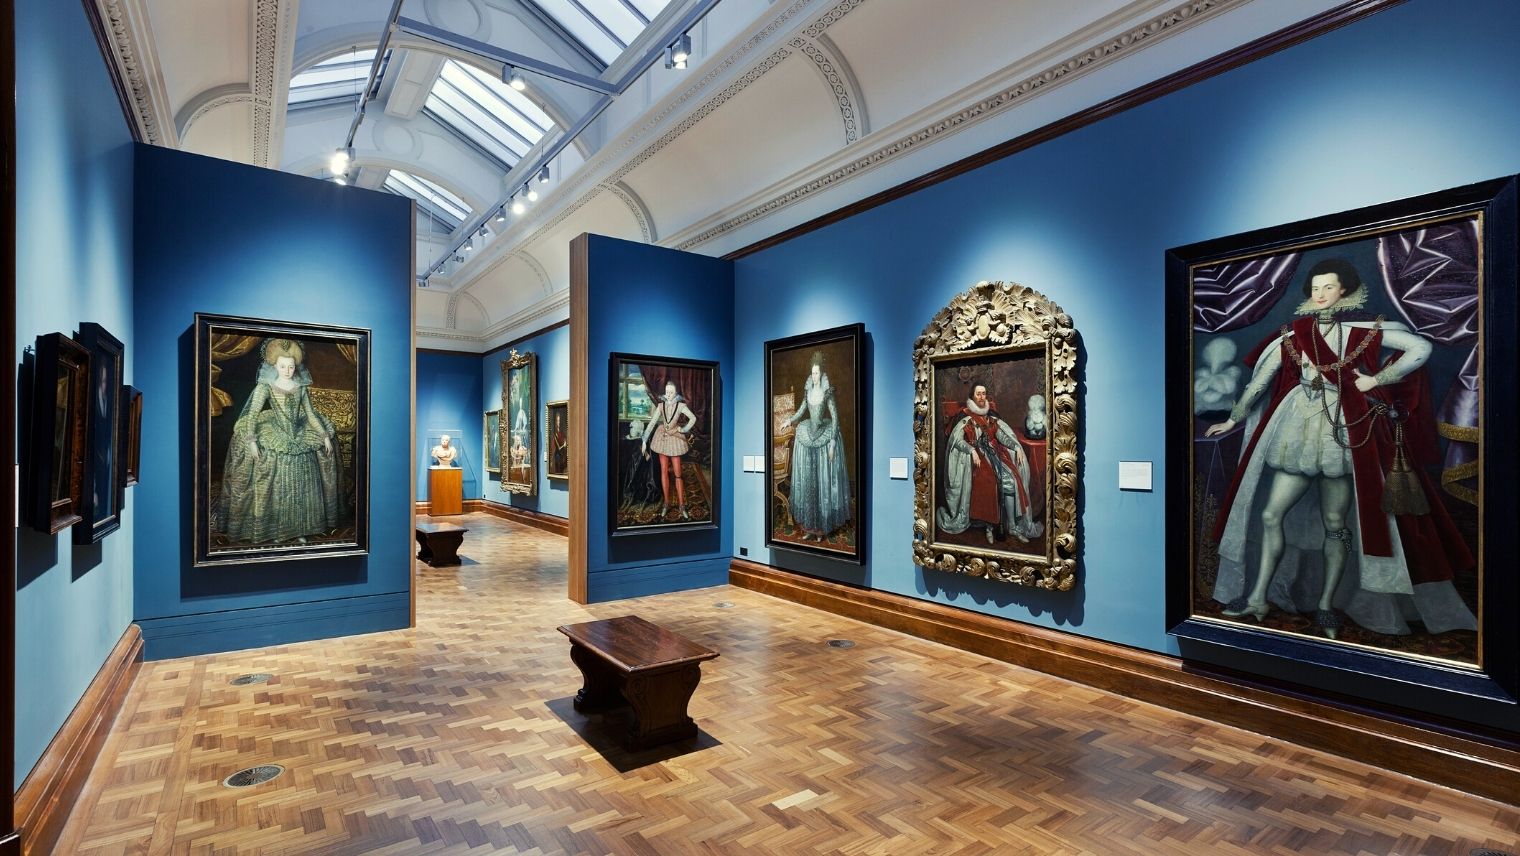 Interior of the National Portrait Gallery